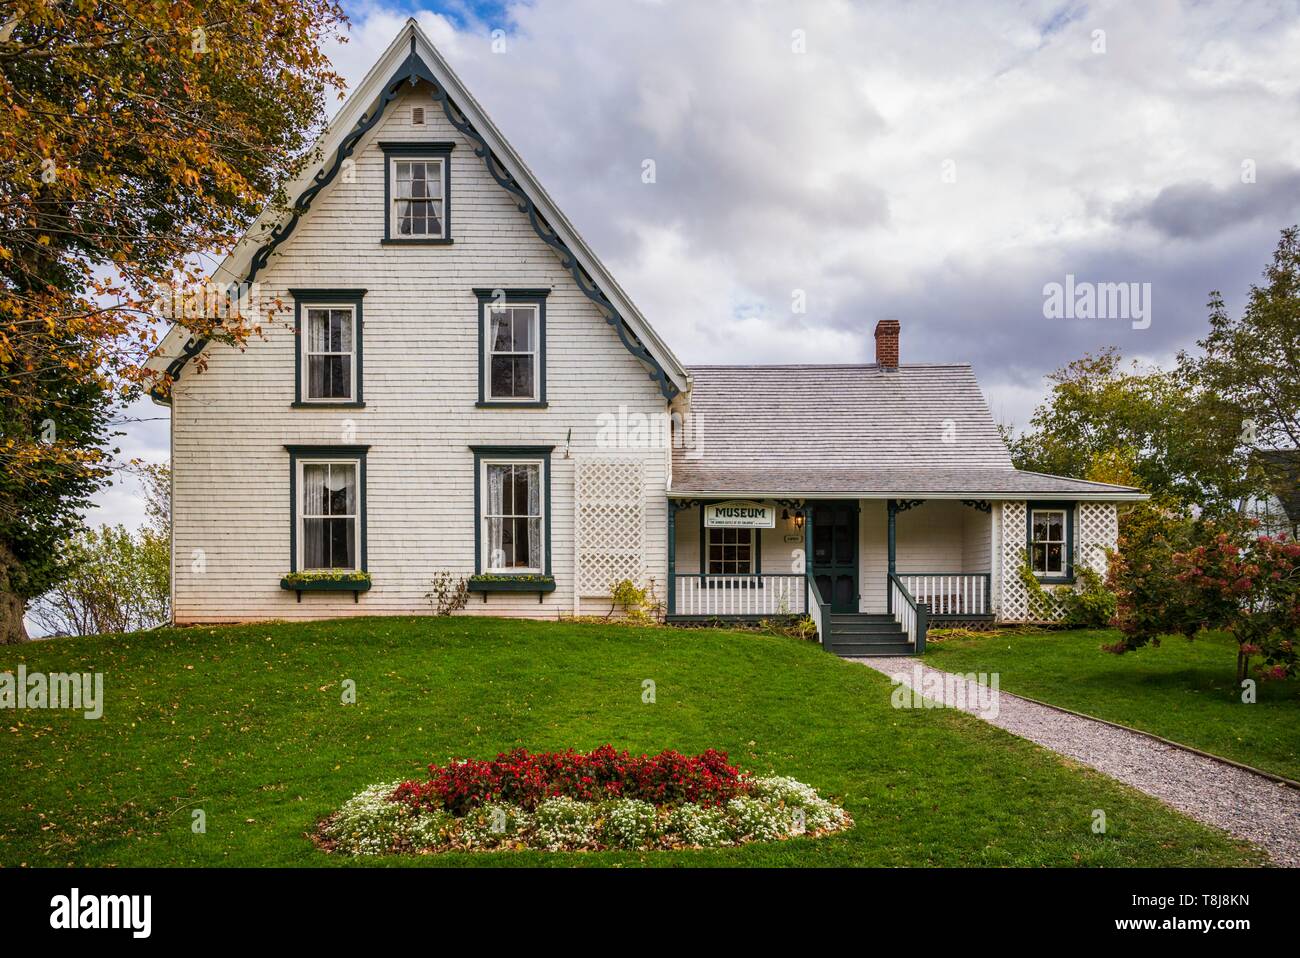 Canada, Prince Edward Island, Park Corner, Anne of Green Gables Museum, former home of the Campbells, relatives of Anne of Green Gables author Lucy Maud Montgomery, exterior Stock Photo